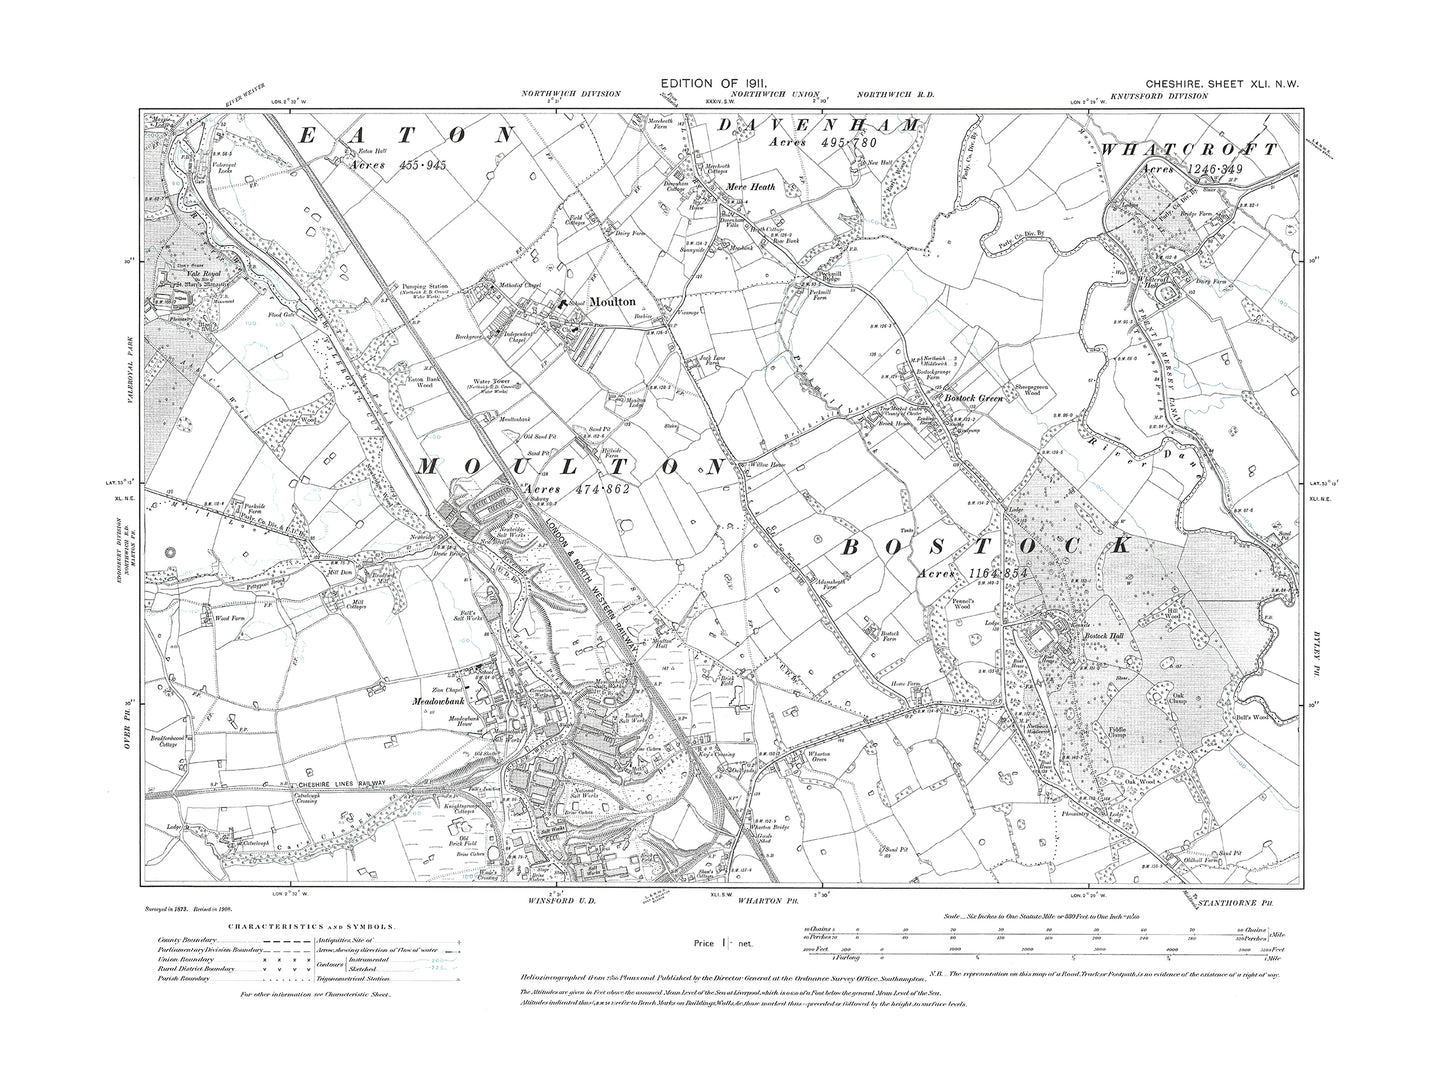 Old OS map dated 1911, showing Winsford (north), Moulton, Bostock in Cheshire 41NW